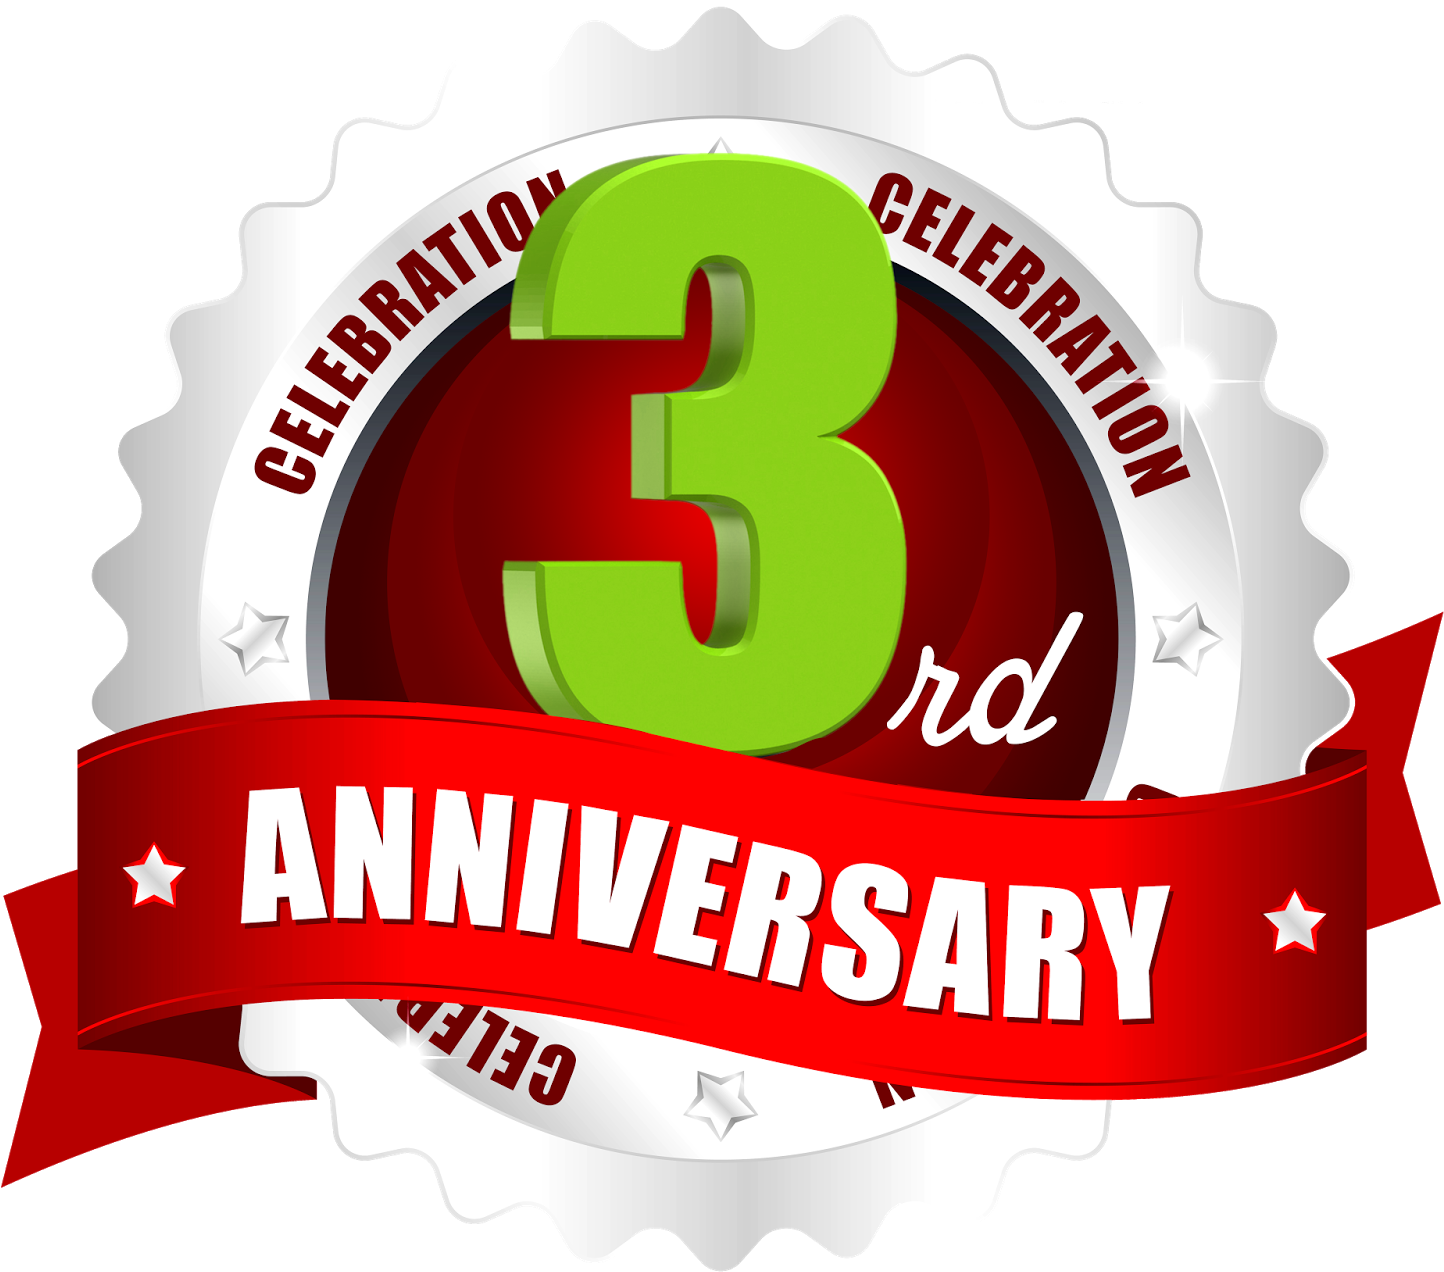 Wedding Anniversary Party - 1st Anniversary Logo Png (1600x1600)